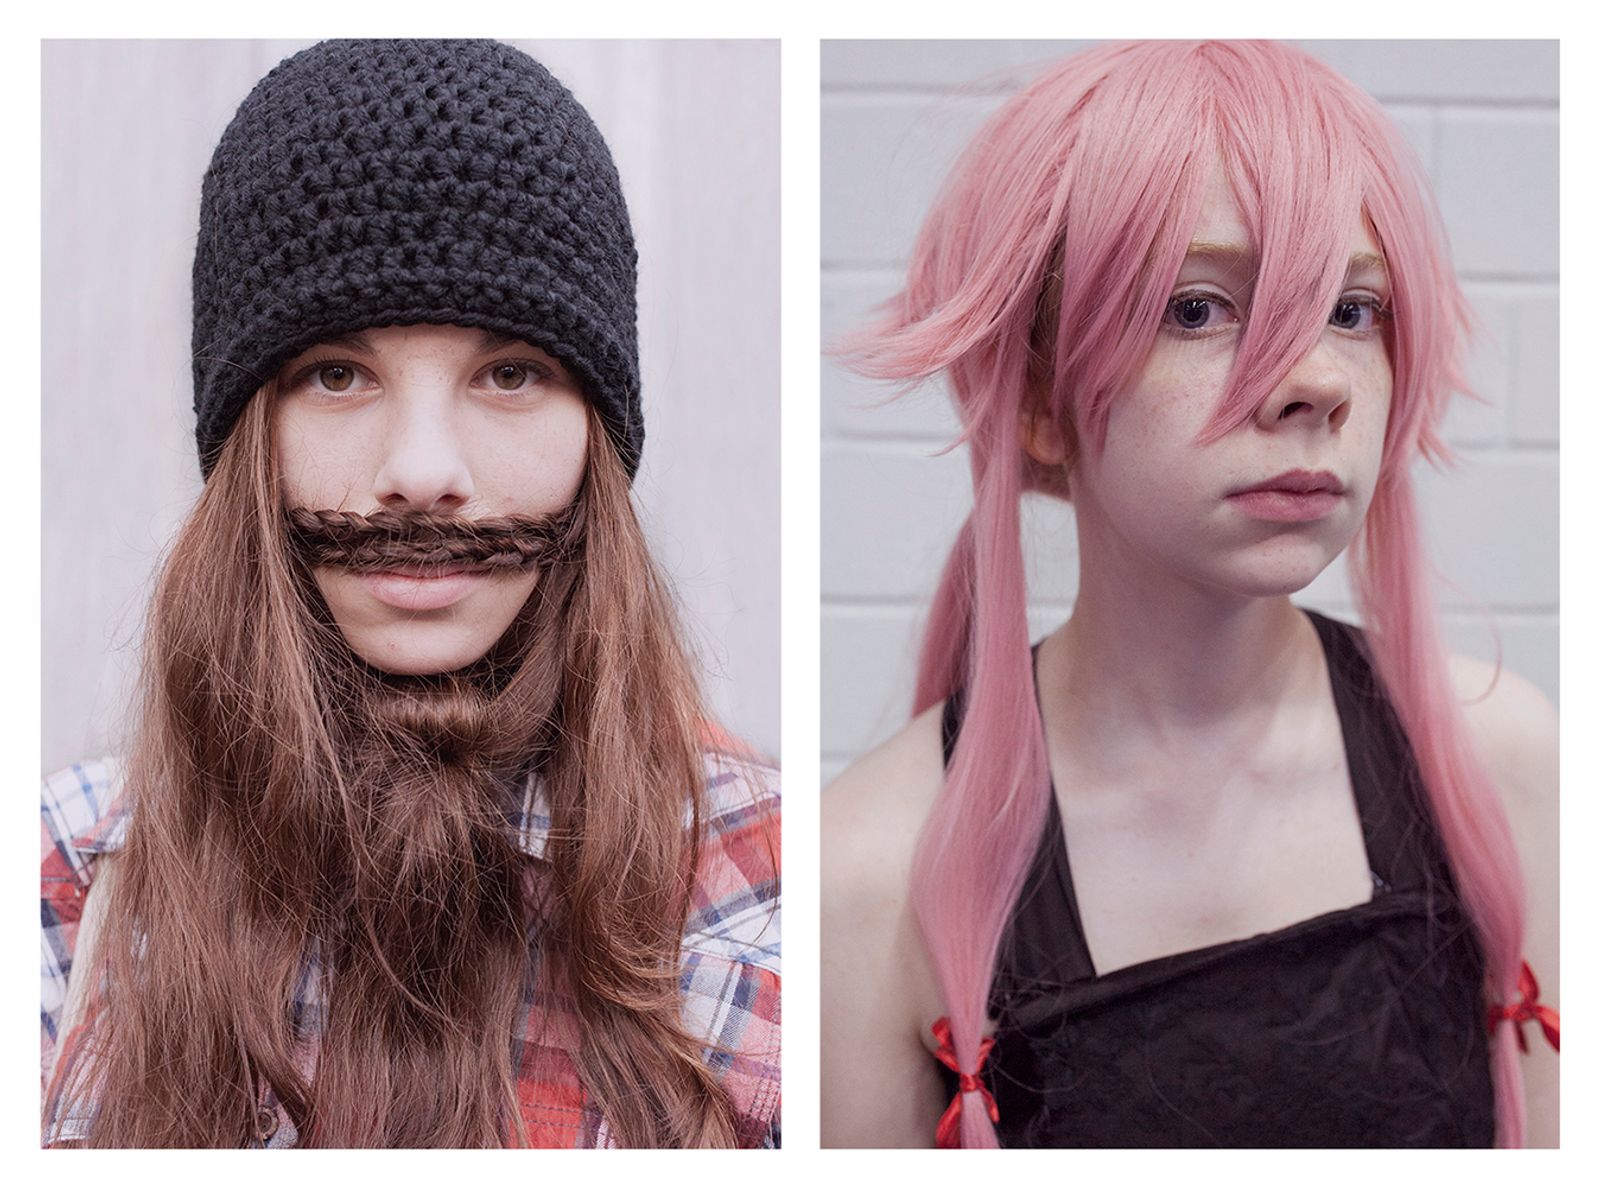 © Ute Behrend - Girl with beard & Girl with pink wig